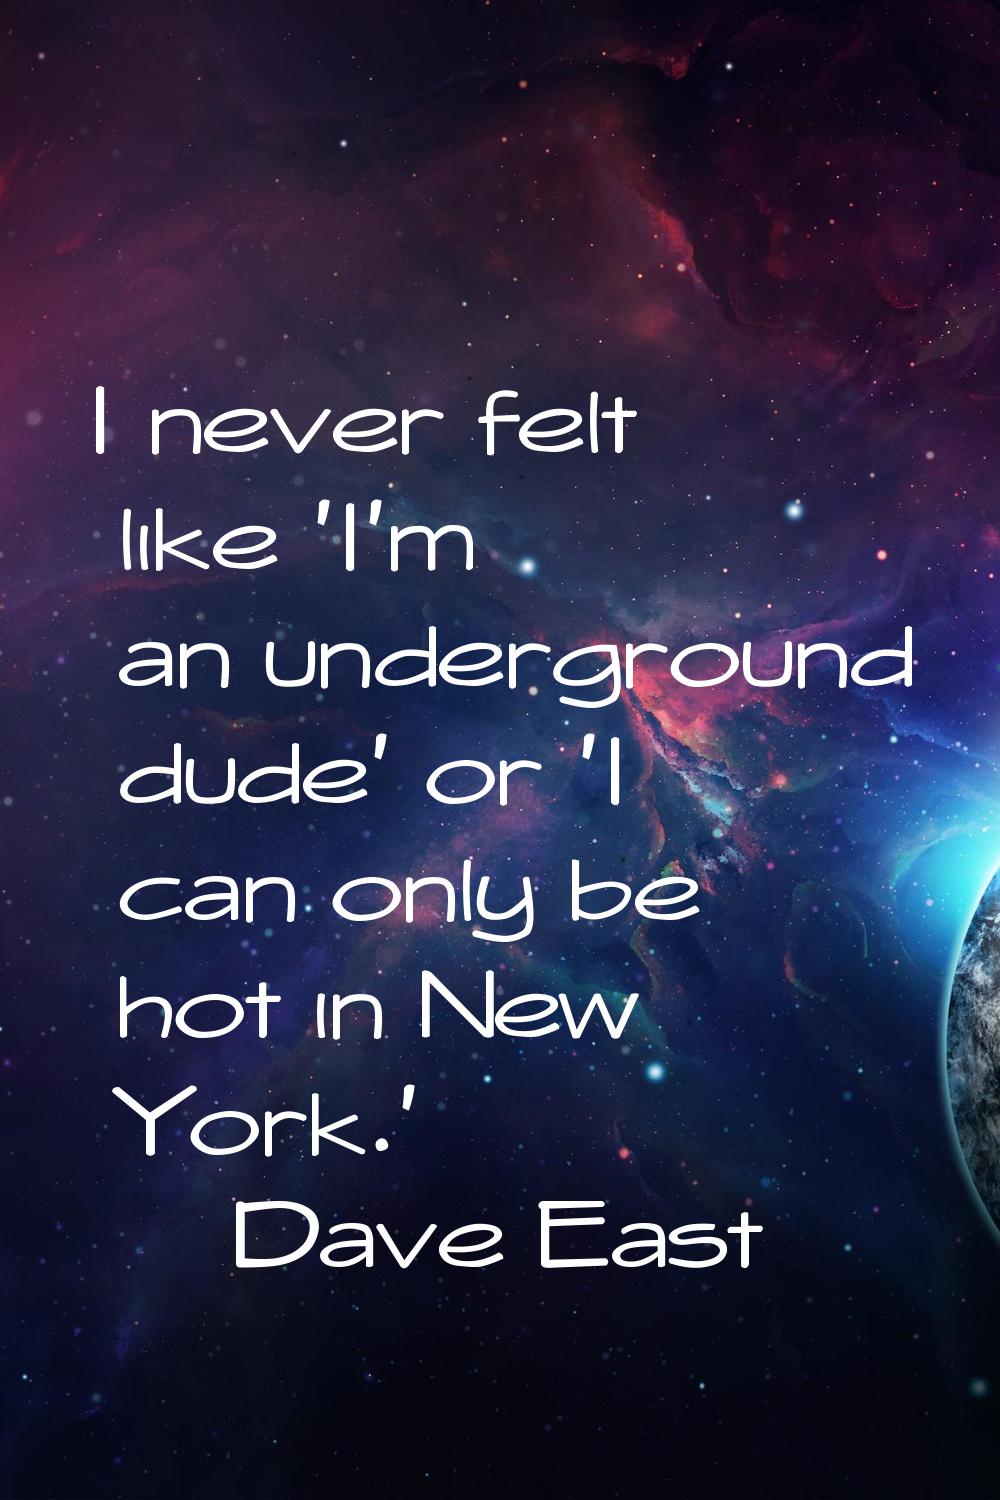 I never felt like 'I'm an underground dude' or 'I can only be hot in New York.'